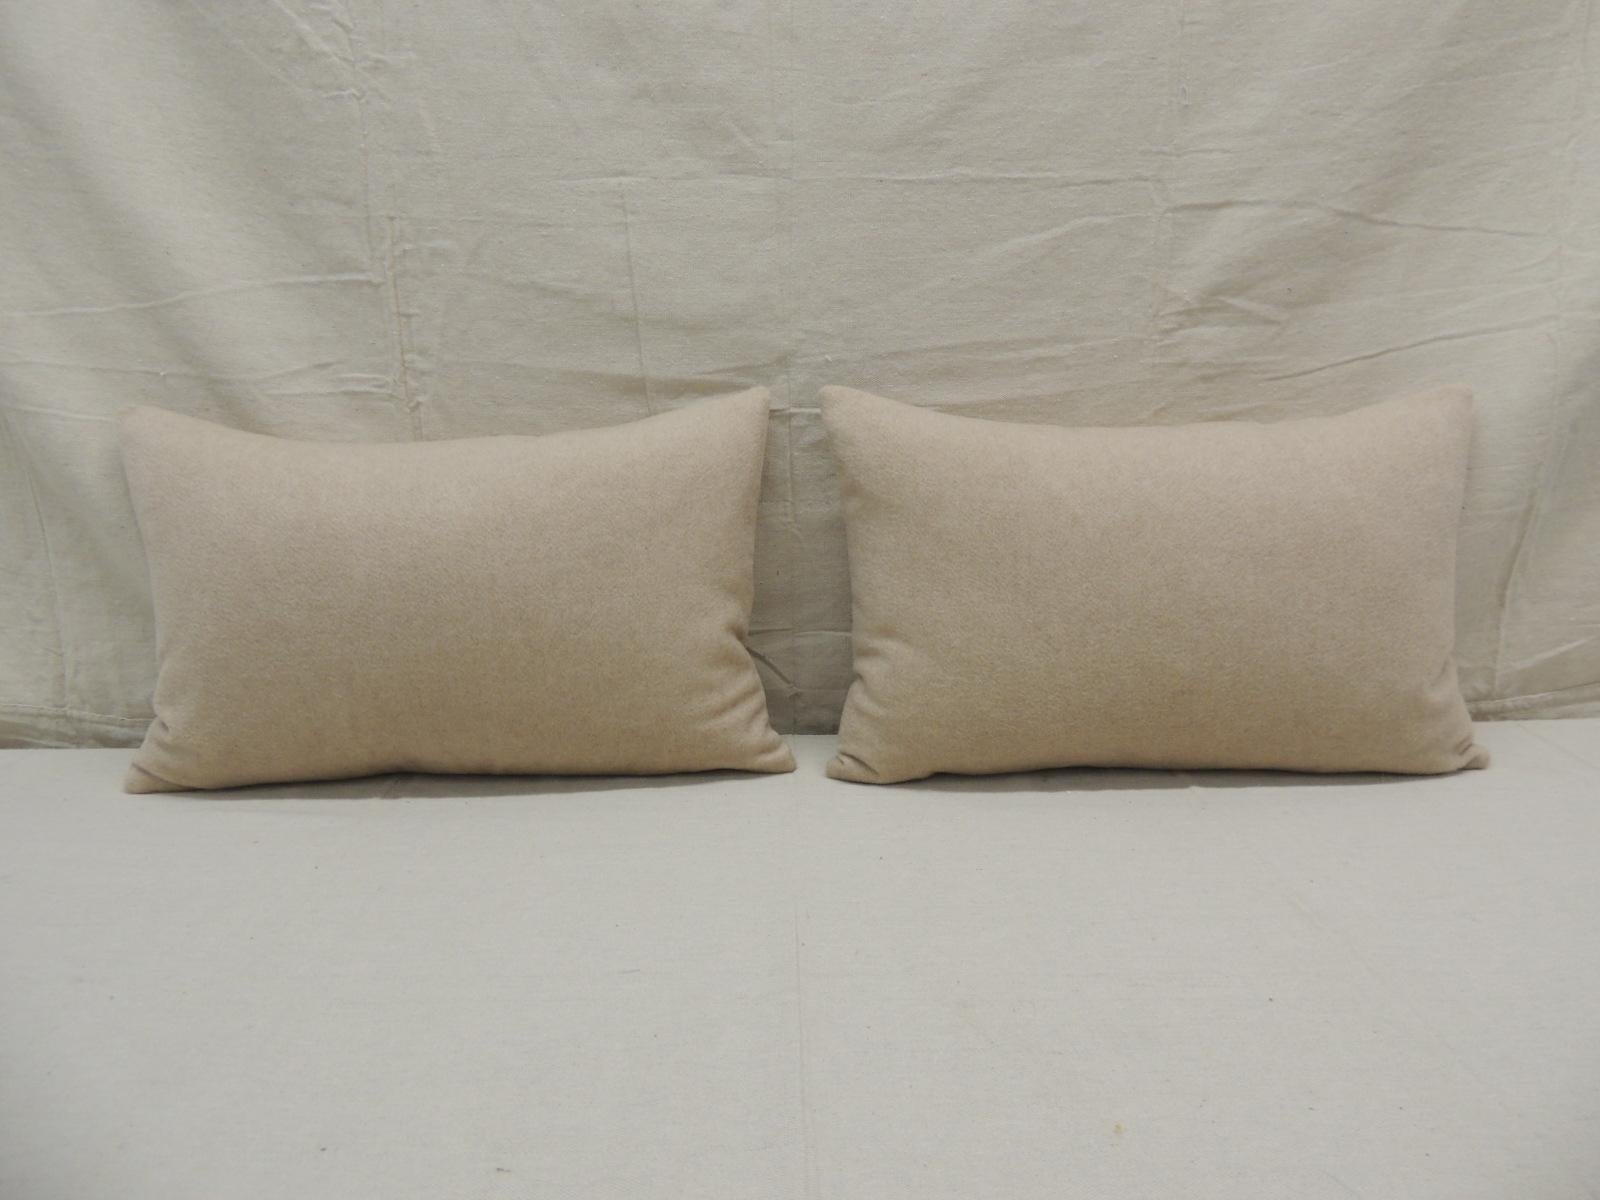 Pair of beige tone-on-tone loro piana cashmere decorative lumbar pillows
Front with tan color sheer wool backings.
Decorative pillow handcrafted and designed in the USA. 
Zipper closure with custom made pillow insert.
Size: 20